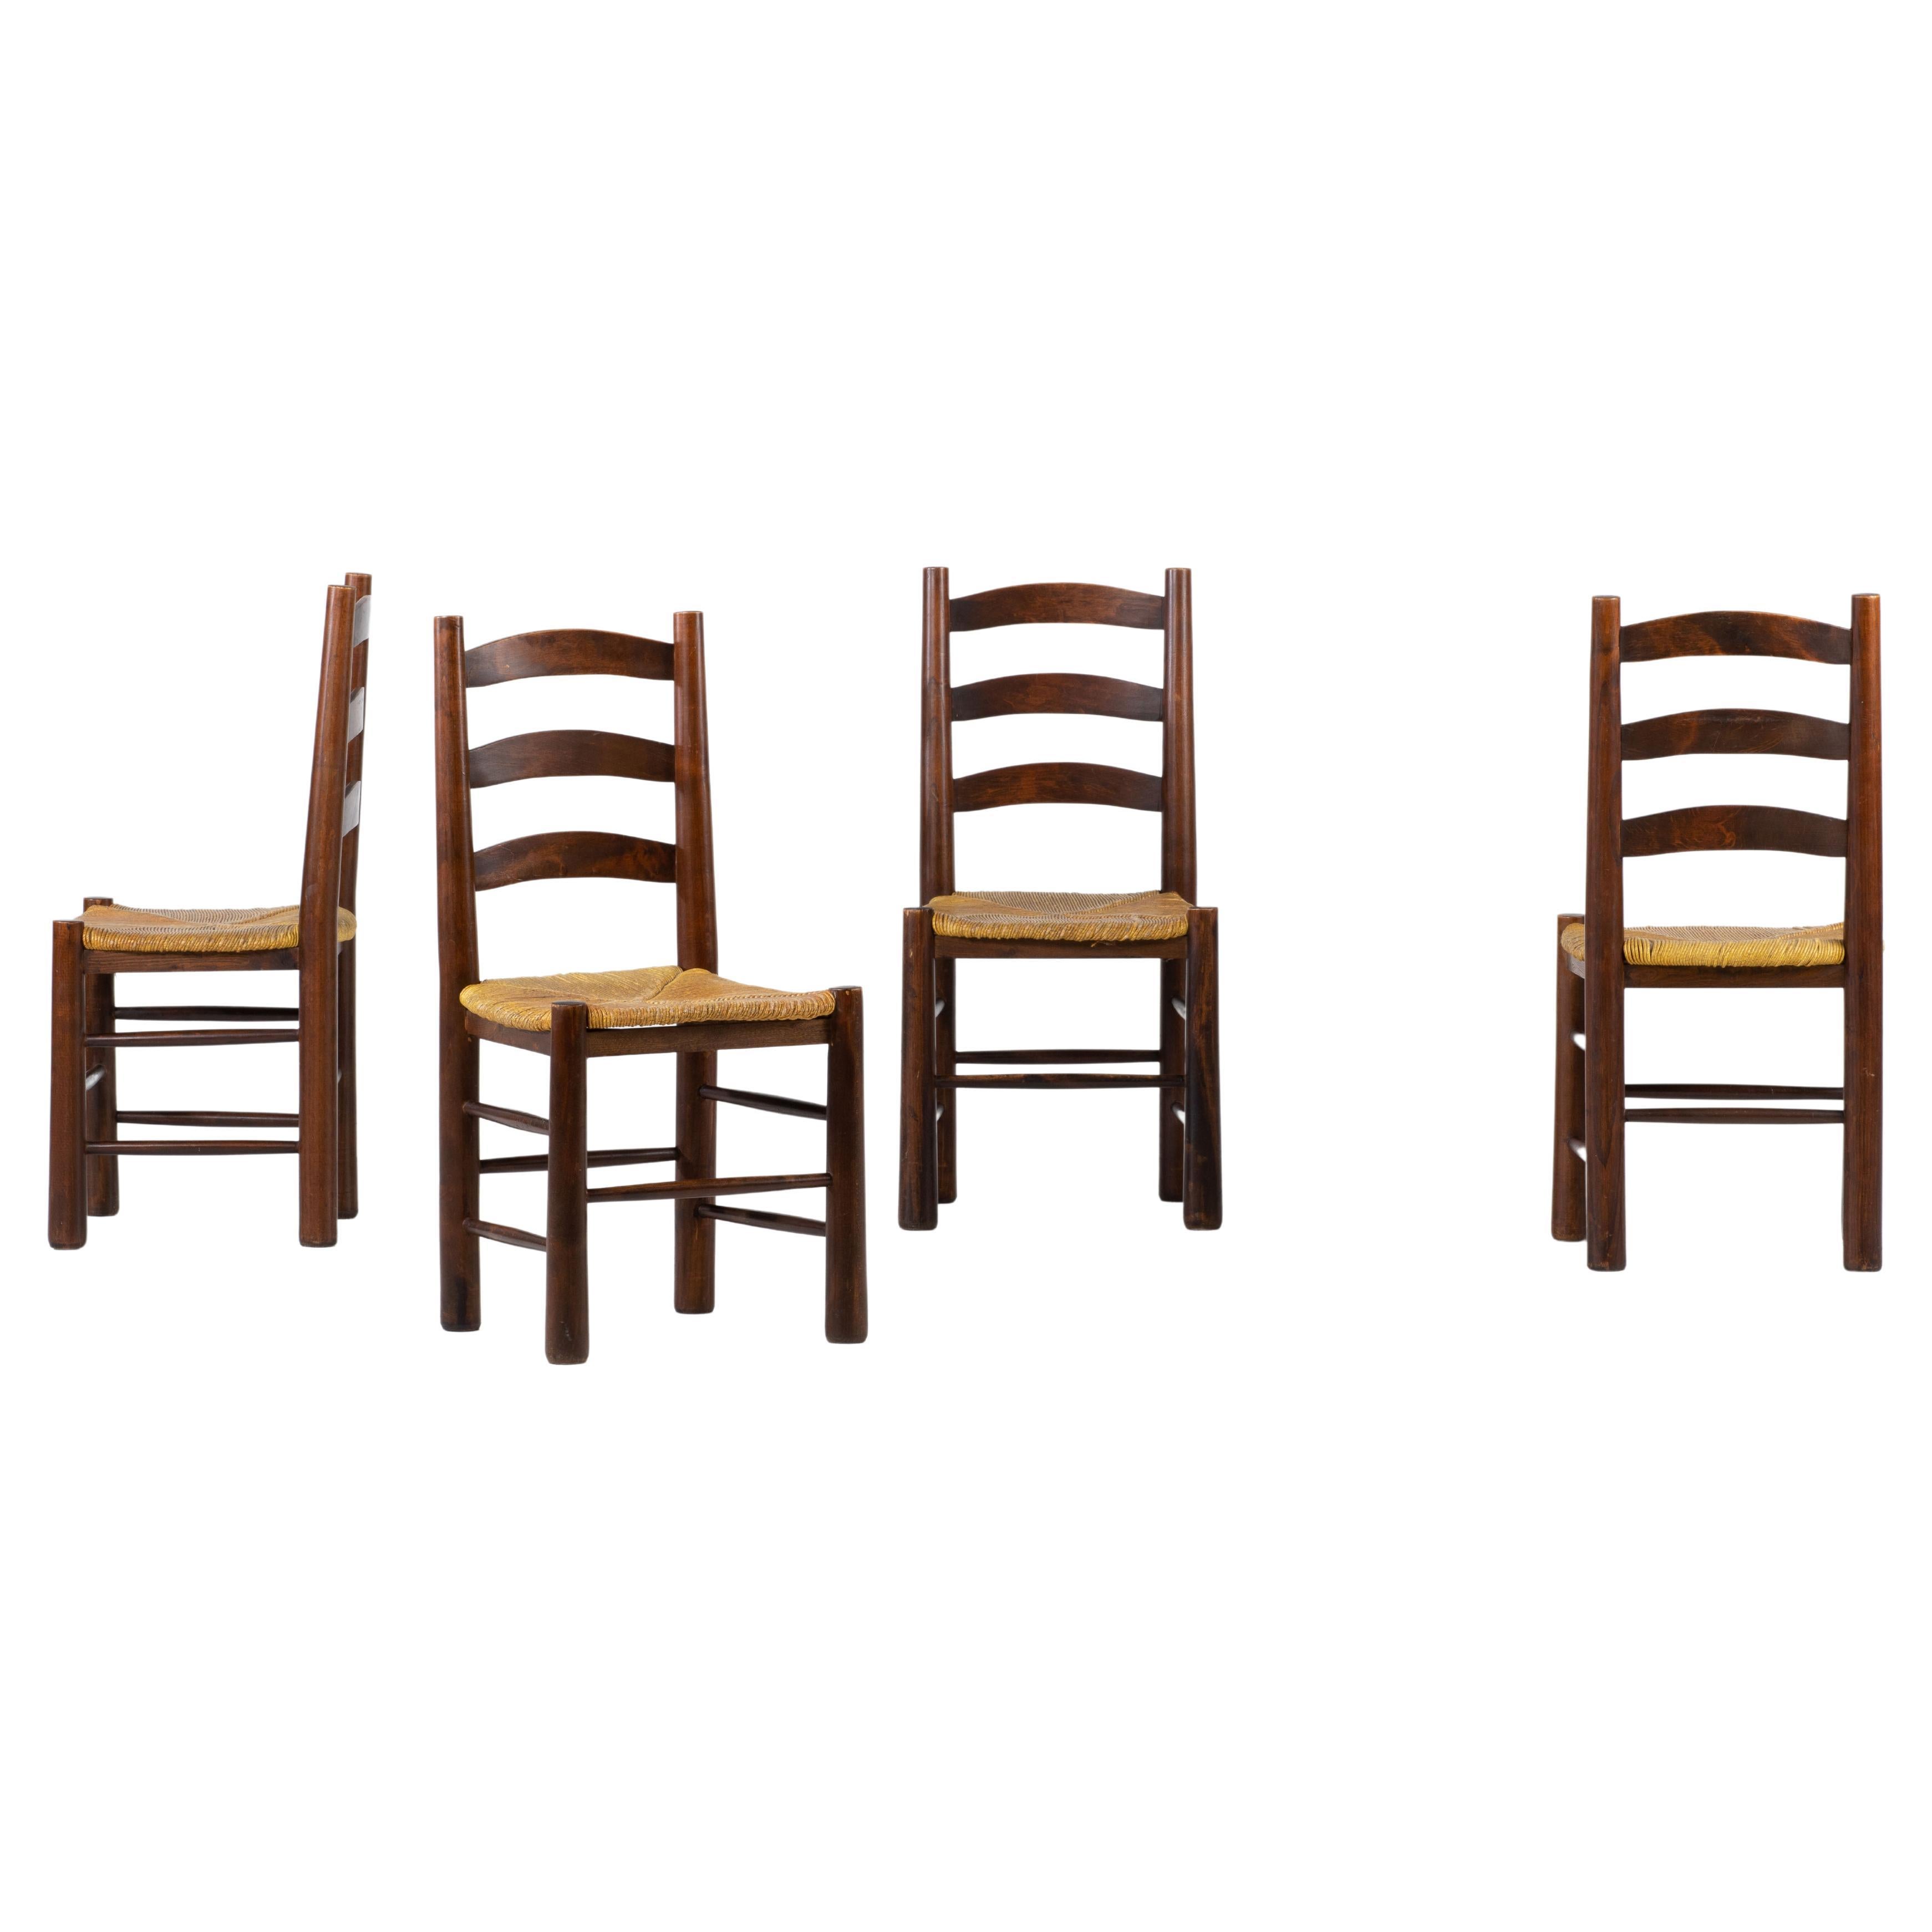 Mid-Century Set of 6 Chairs in style of Perriand, France, 1940 For Sale